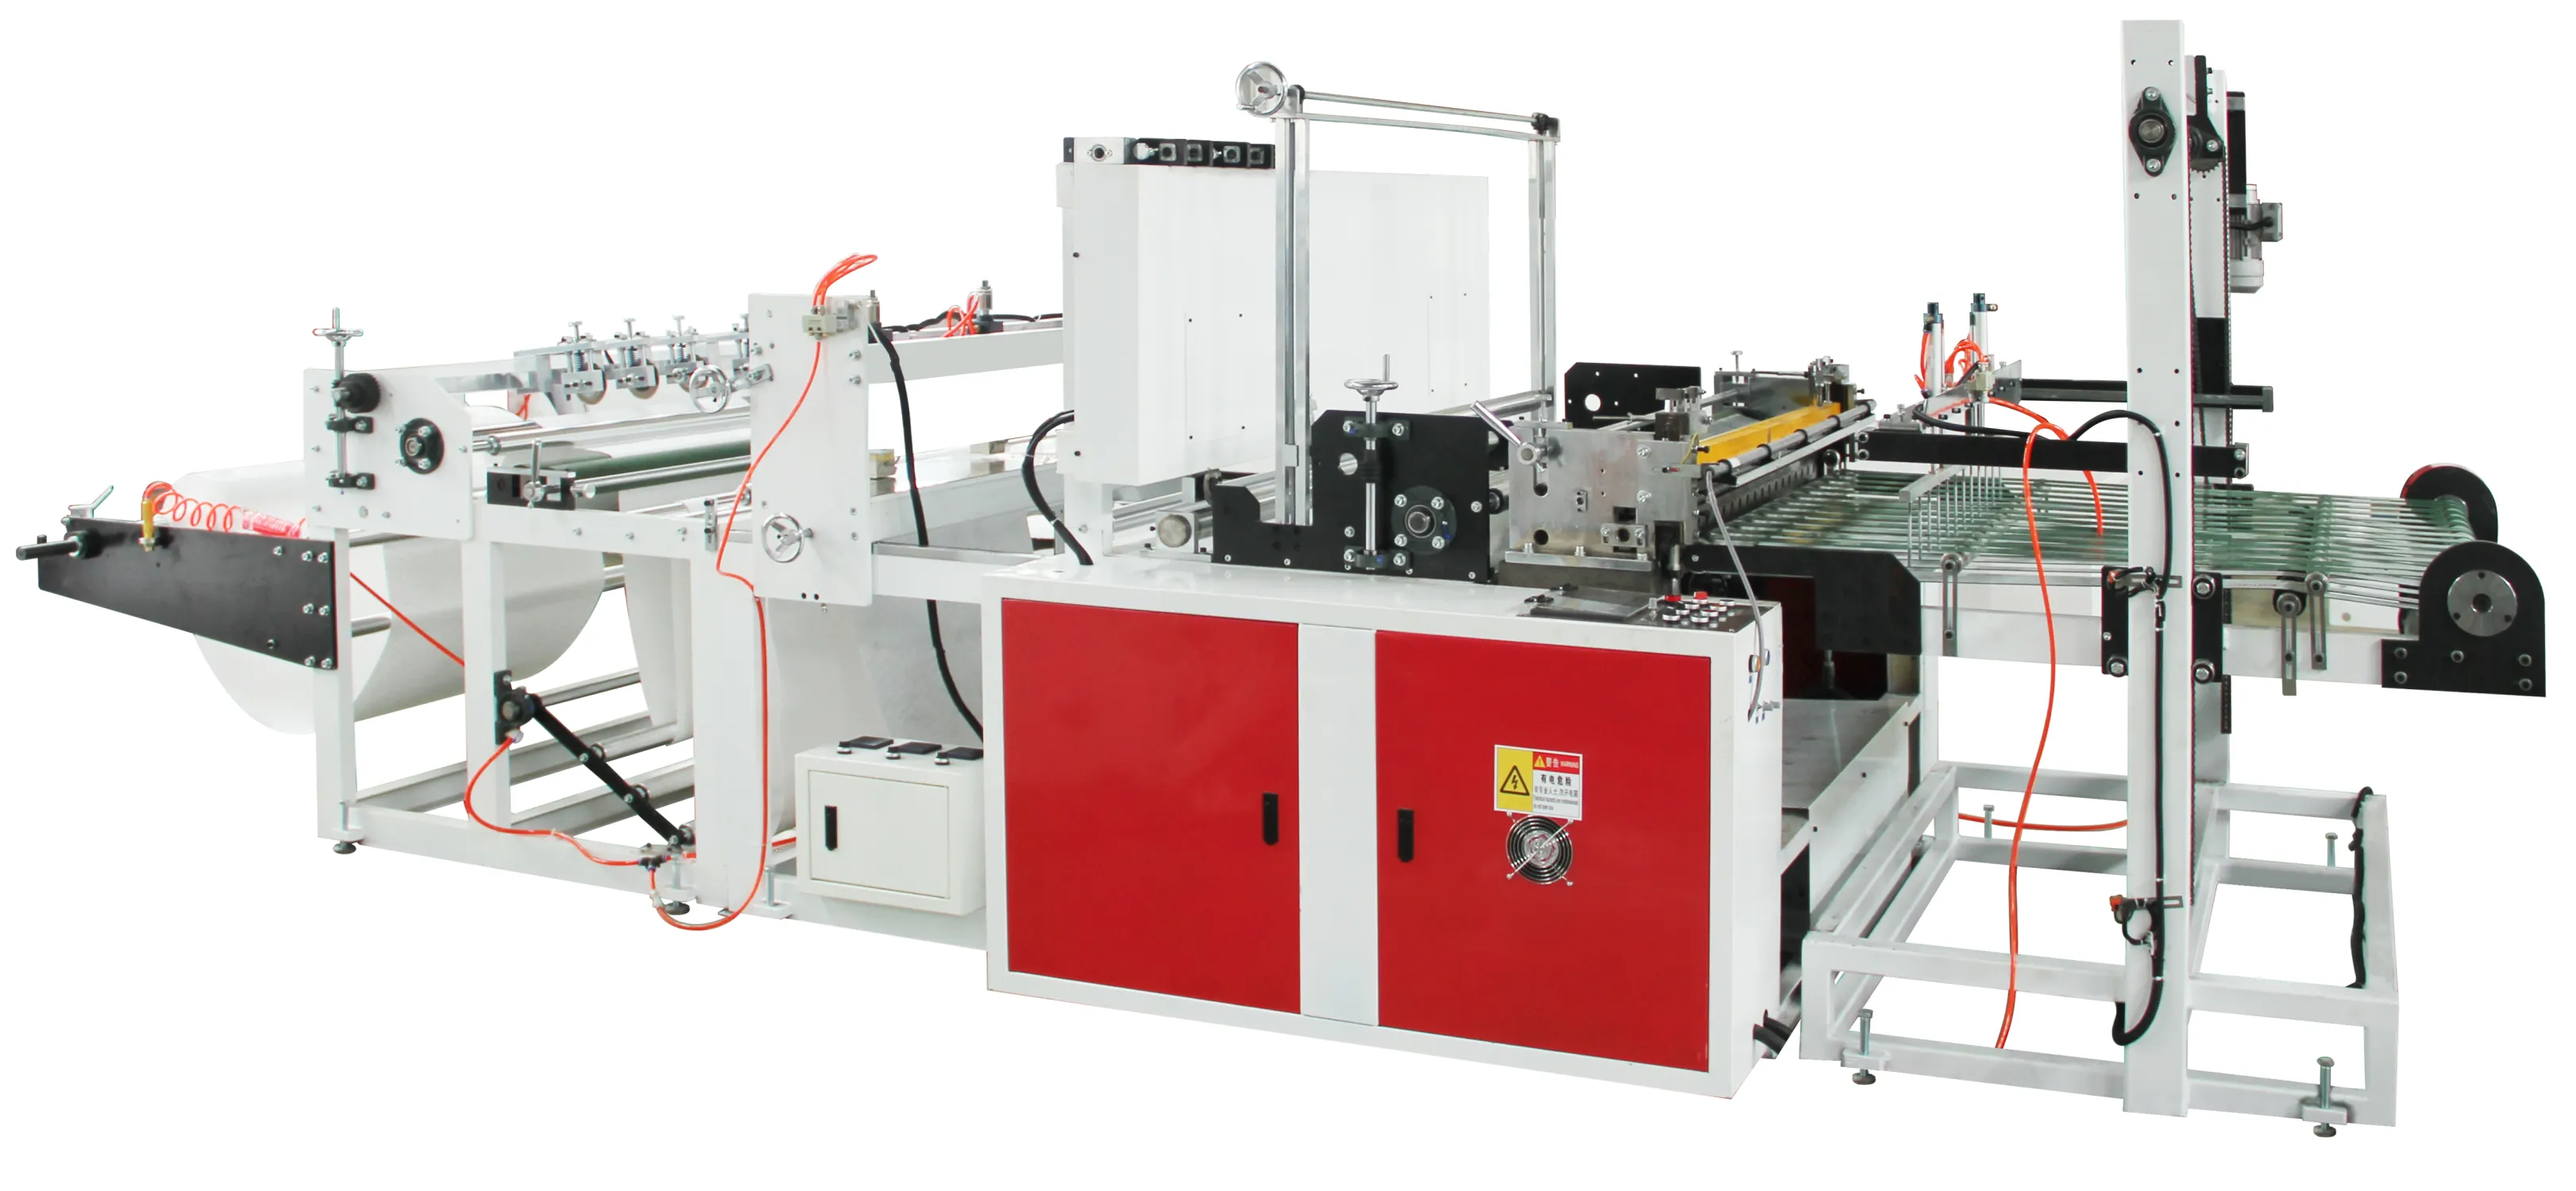 Oil Absorbent Cotton Rewinding and Slicing Machine SliderImage